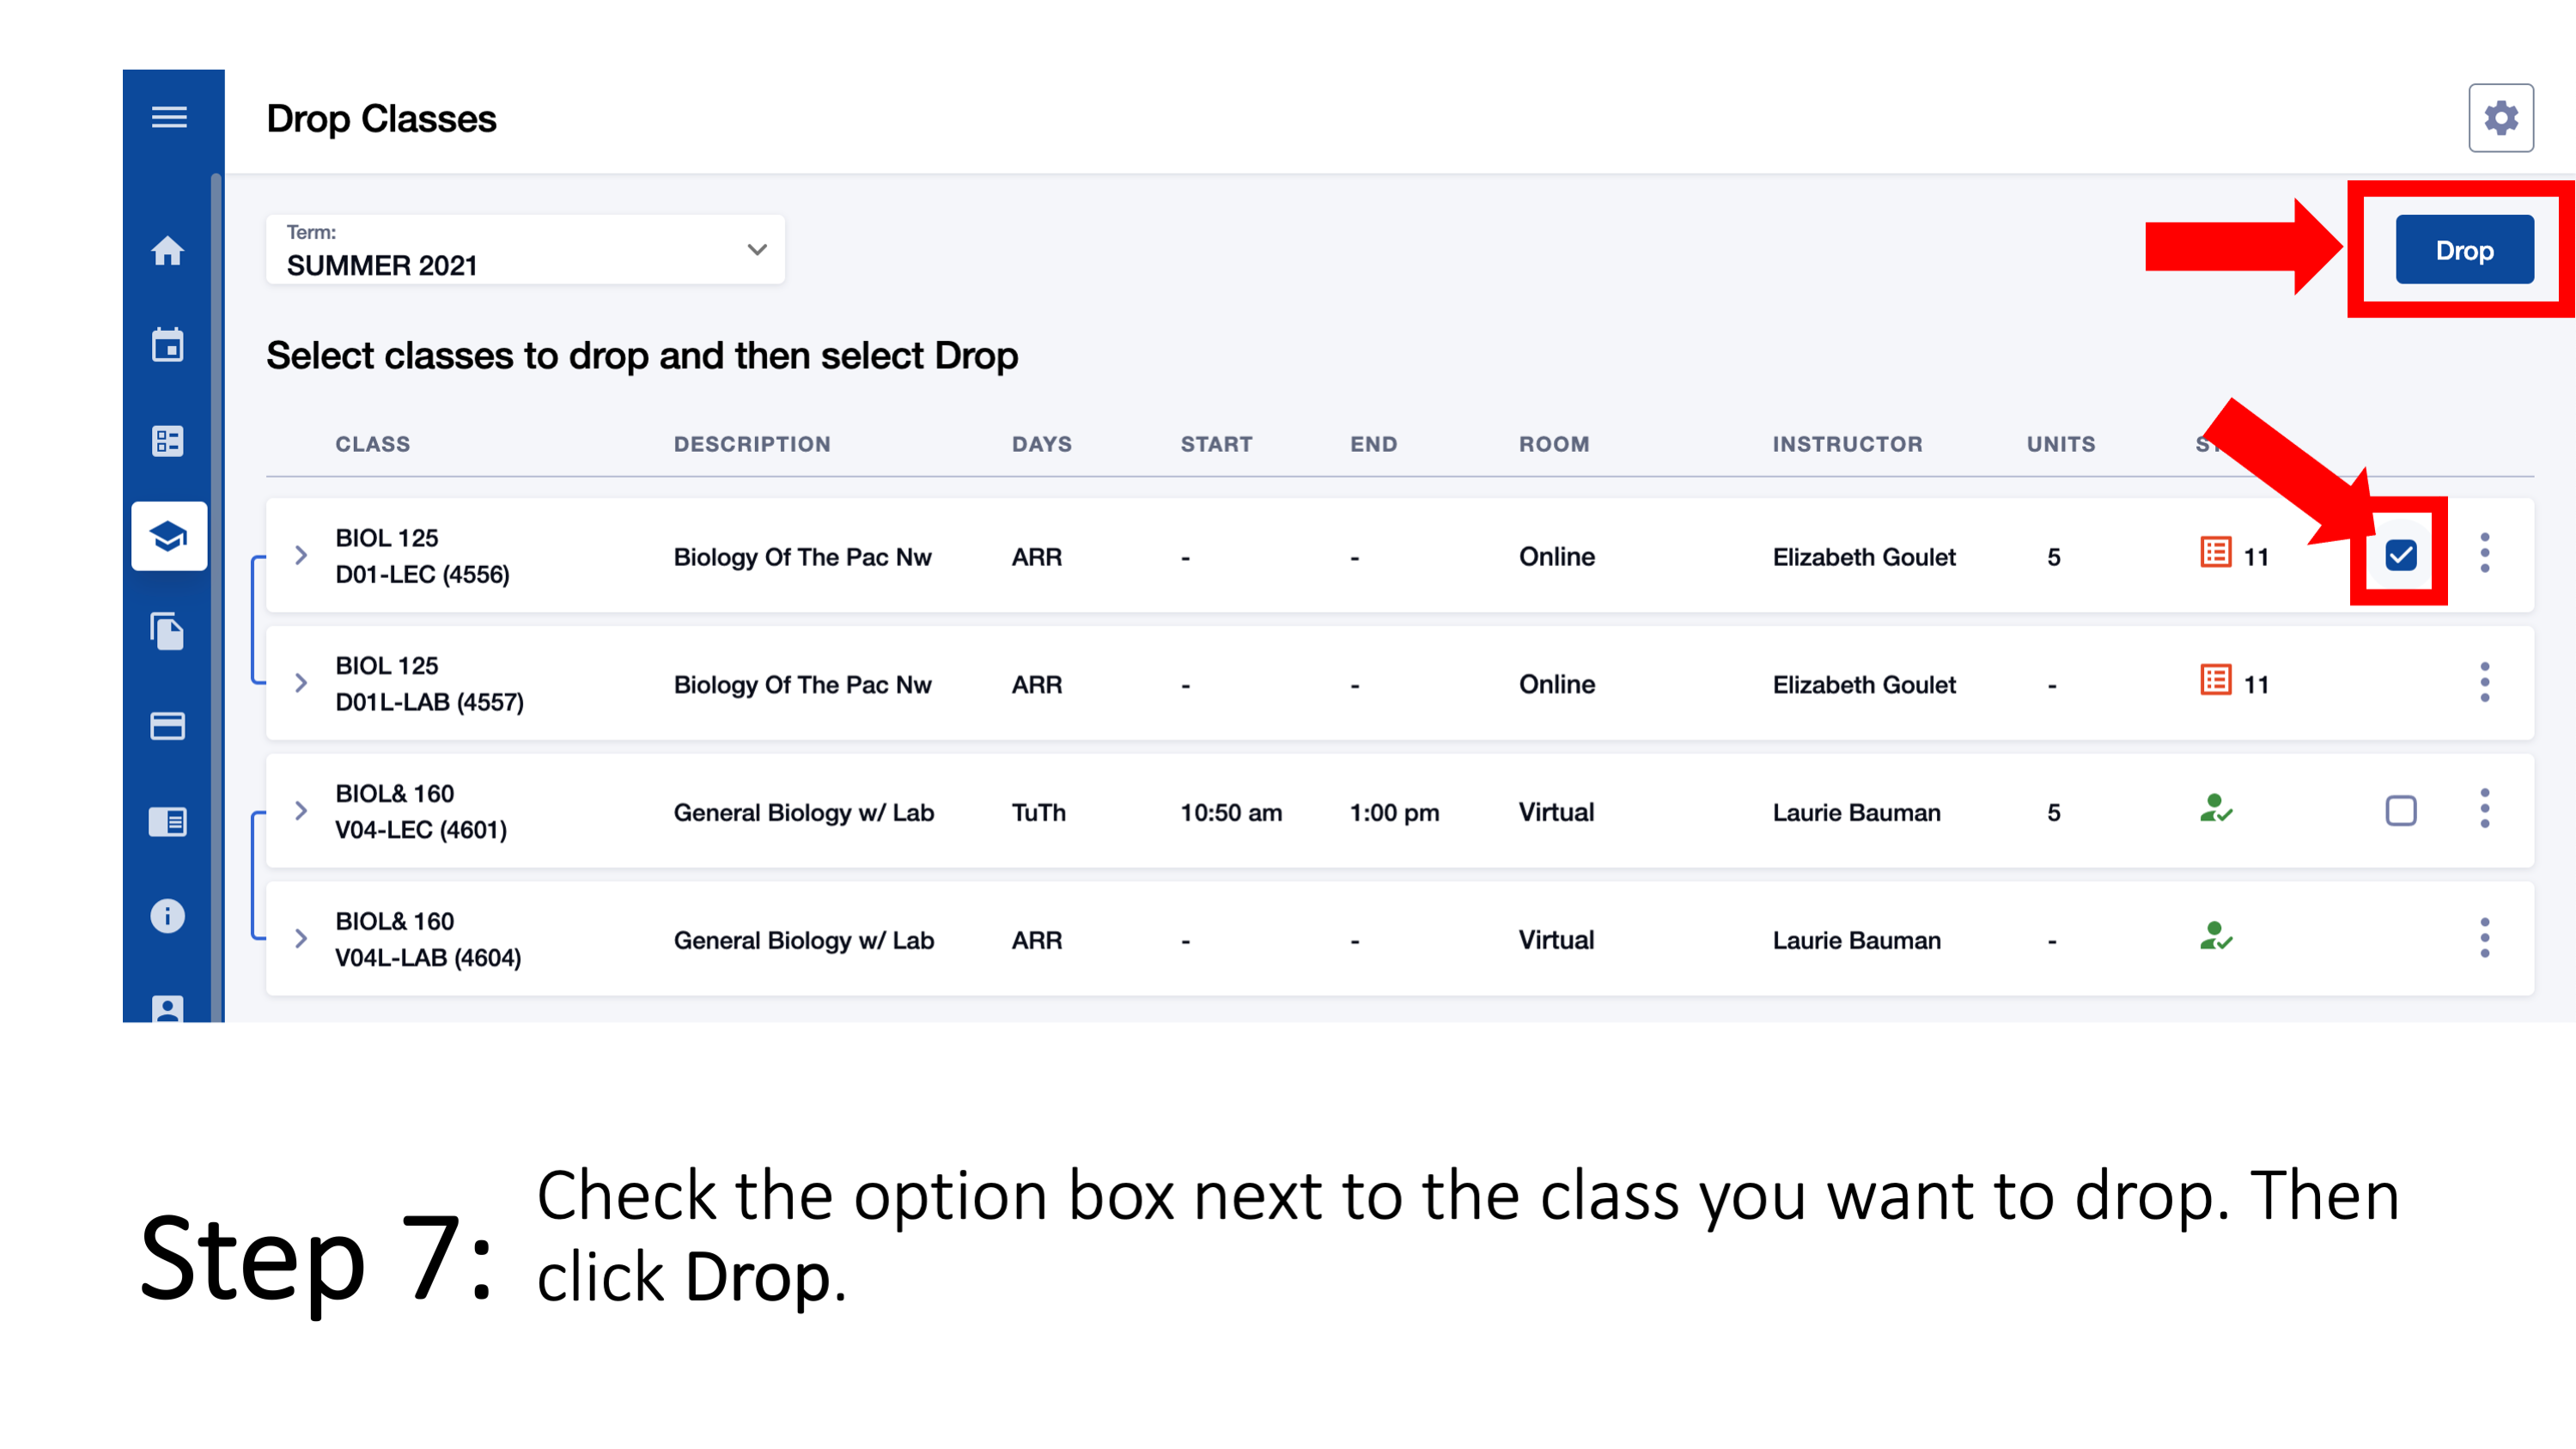 Step 7: Check the option box next to the class you want to drop. Then click Drop.